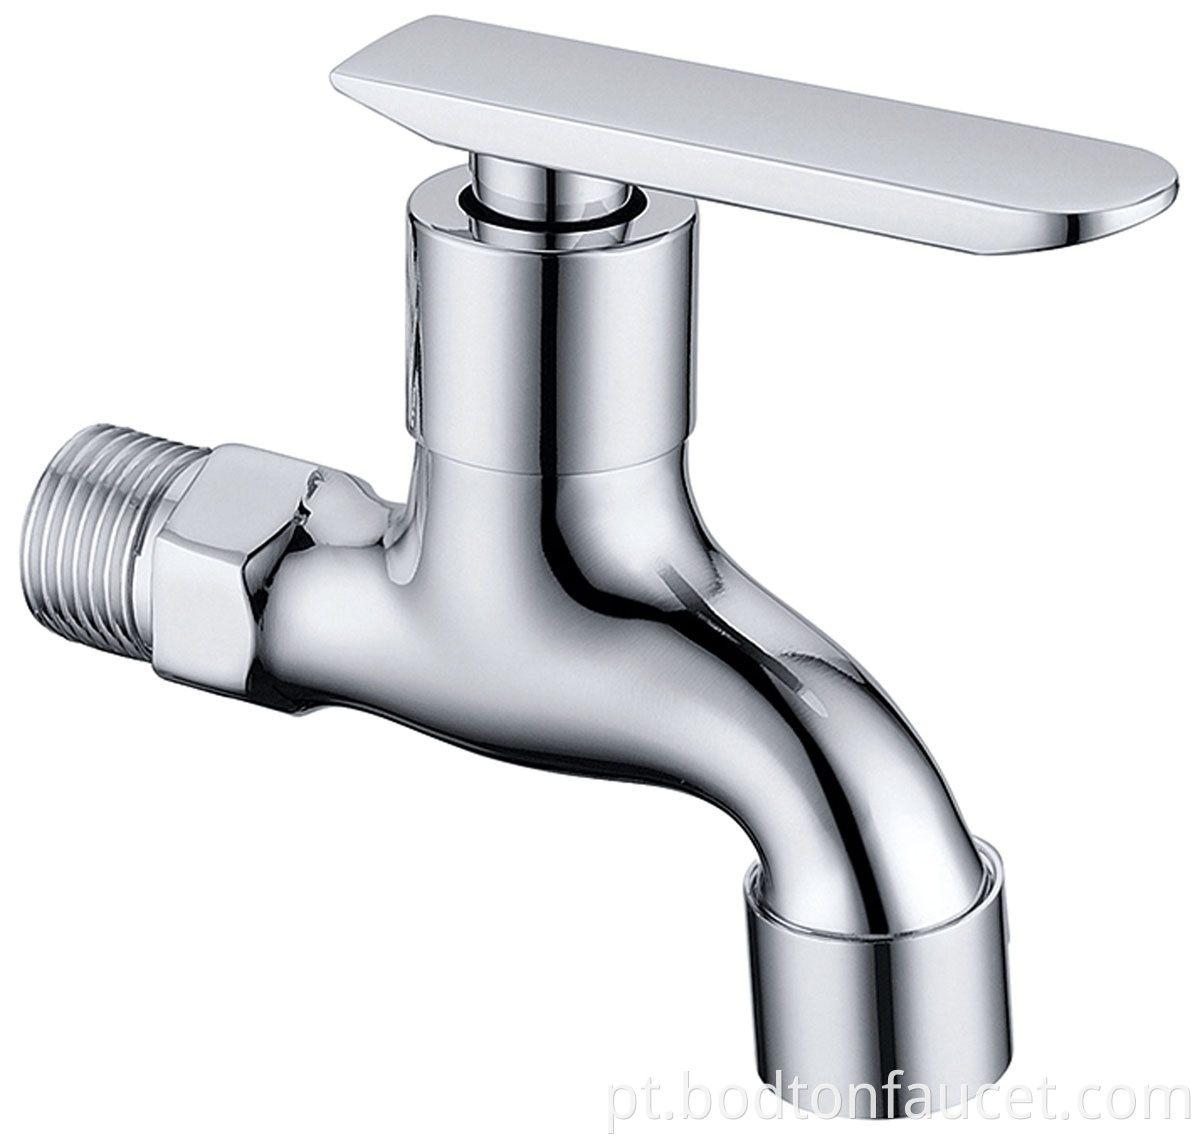 Single handle faucet angle valve for courtyard